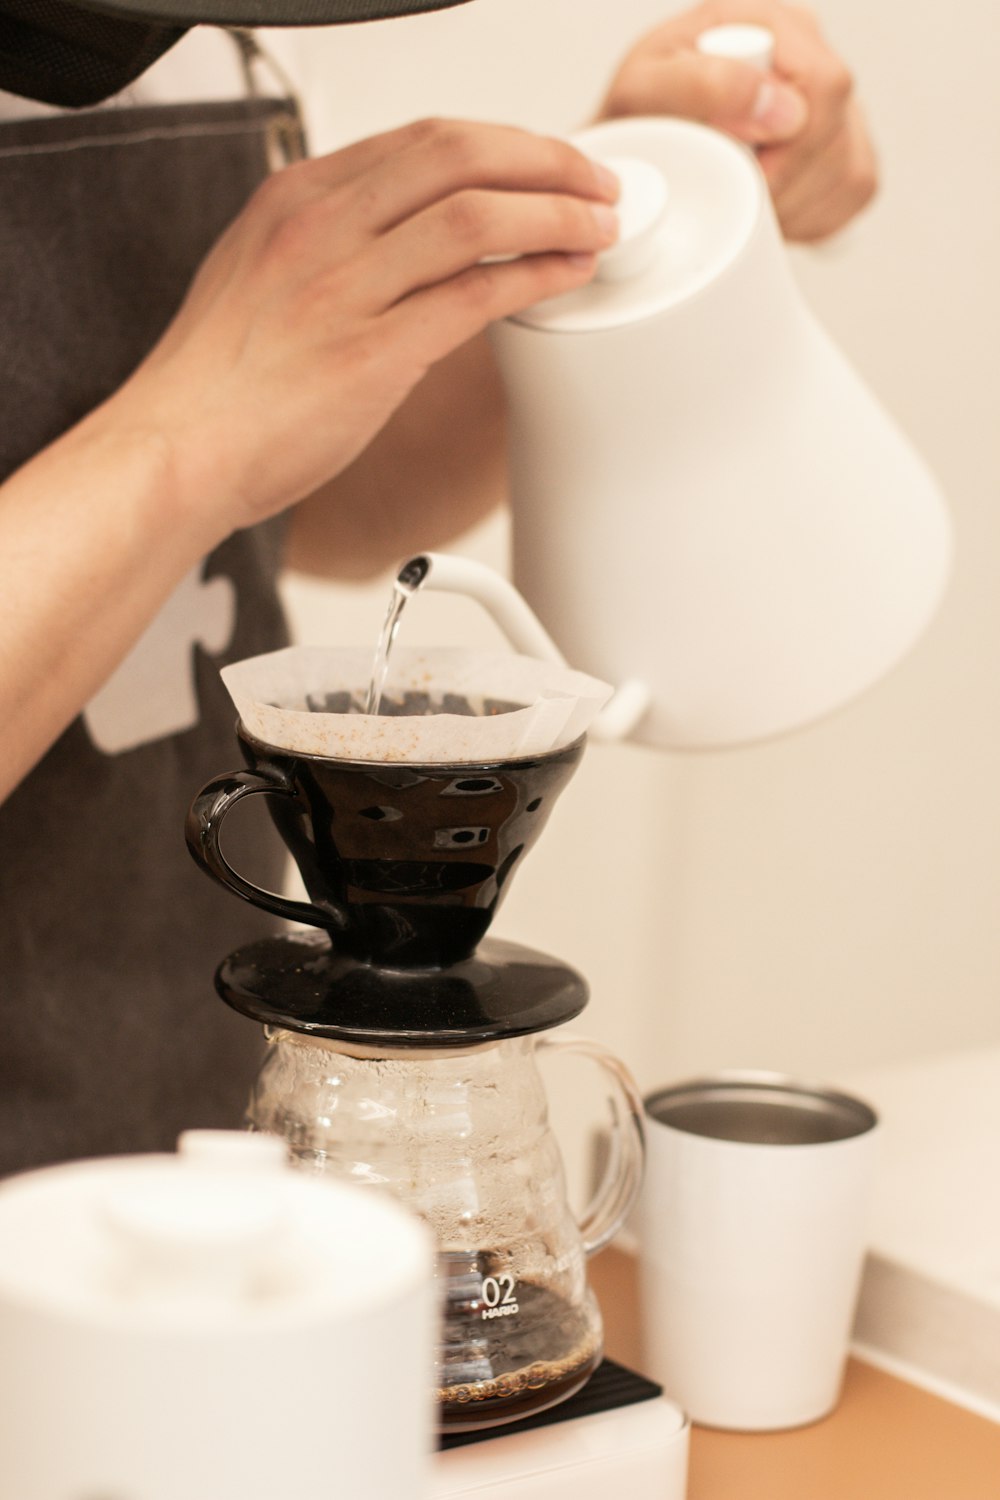 a person pours a cup of coffee from a coffee maker